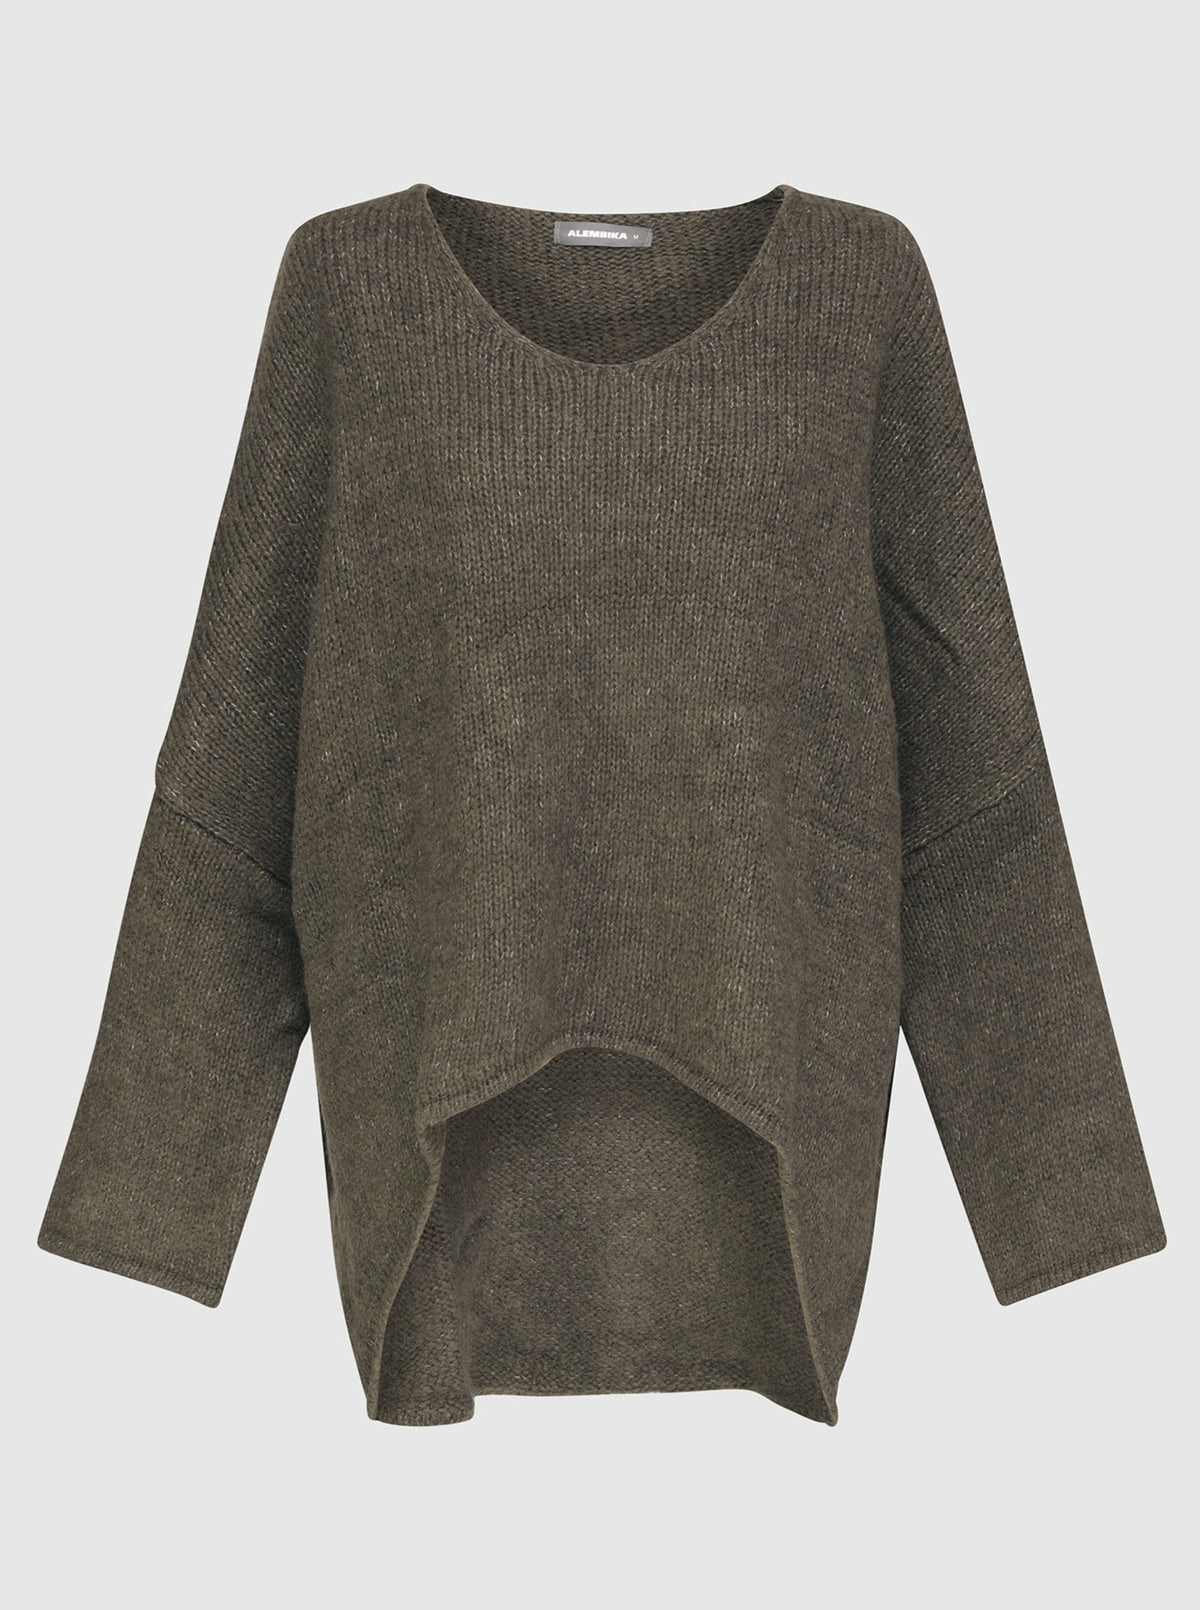 Alembika (Pre-Order) High Low Sweater, Taupe - Statement Boutique